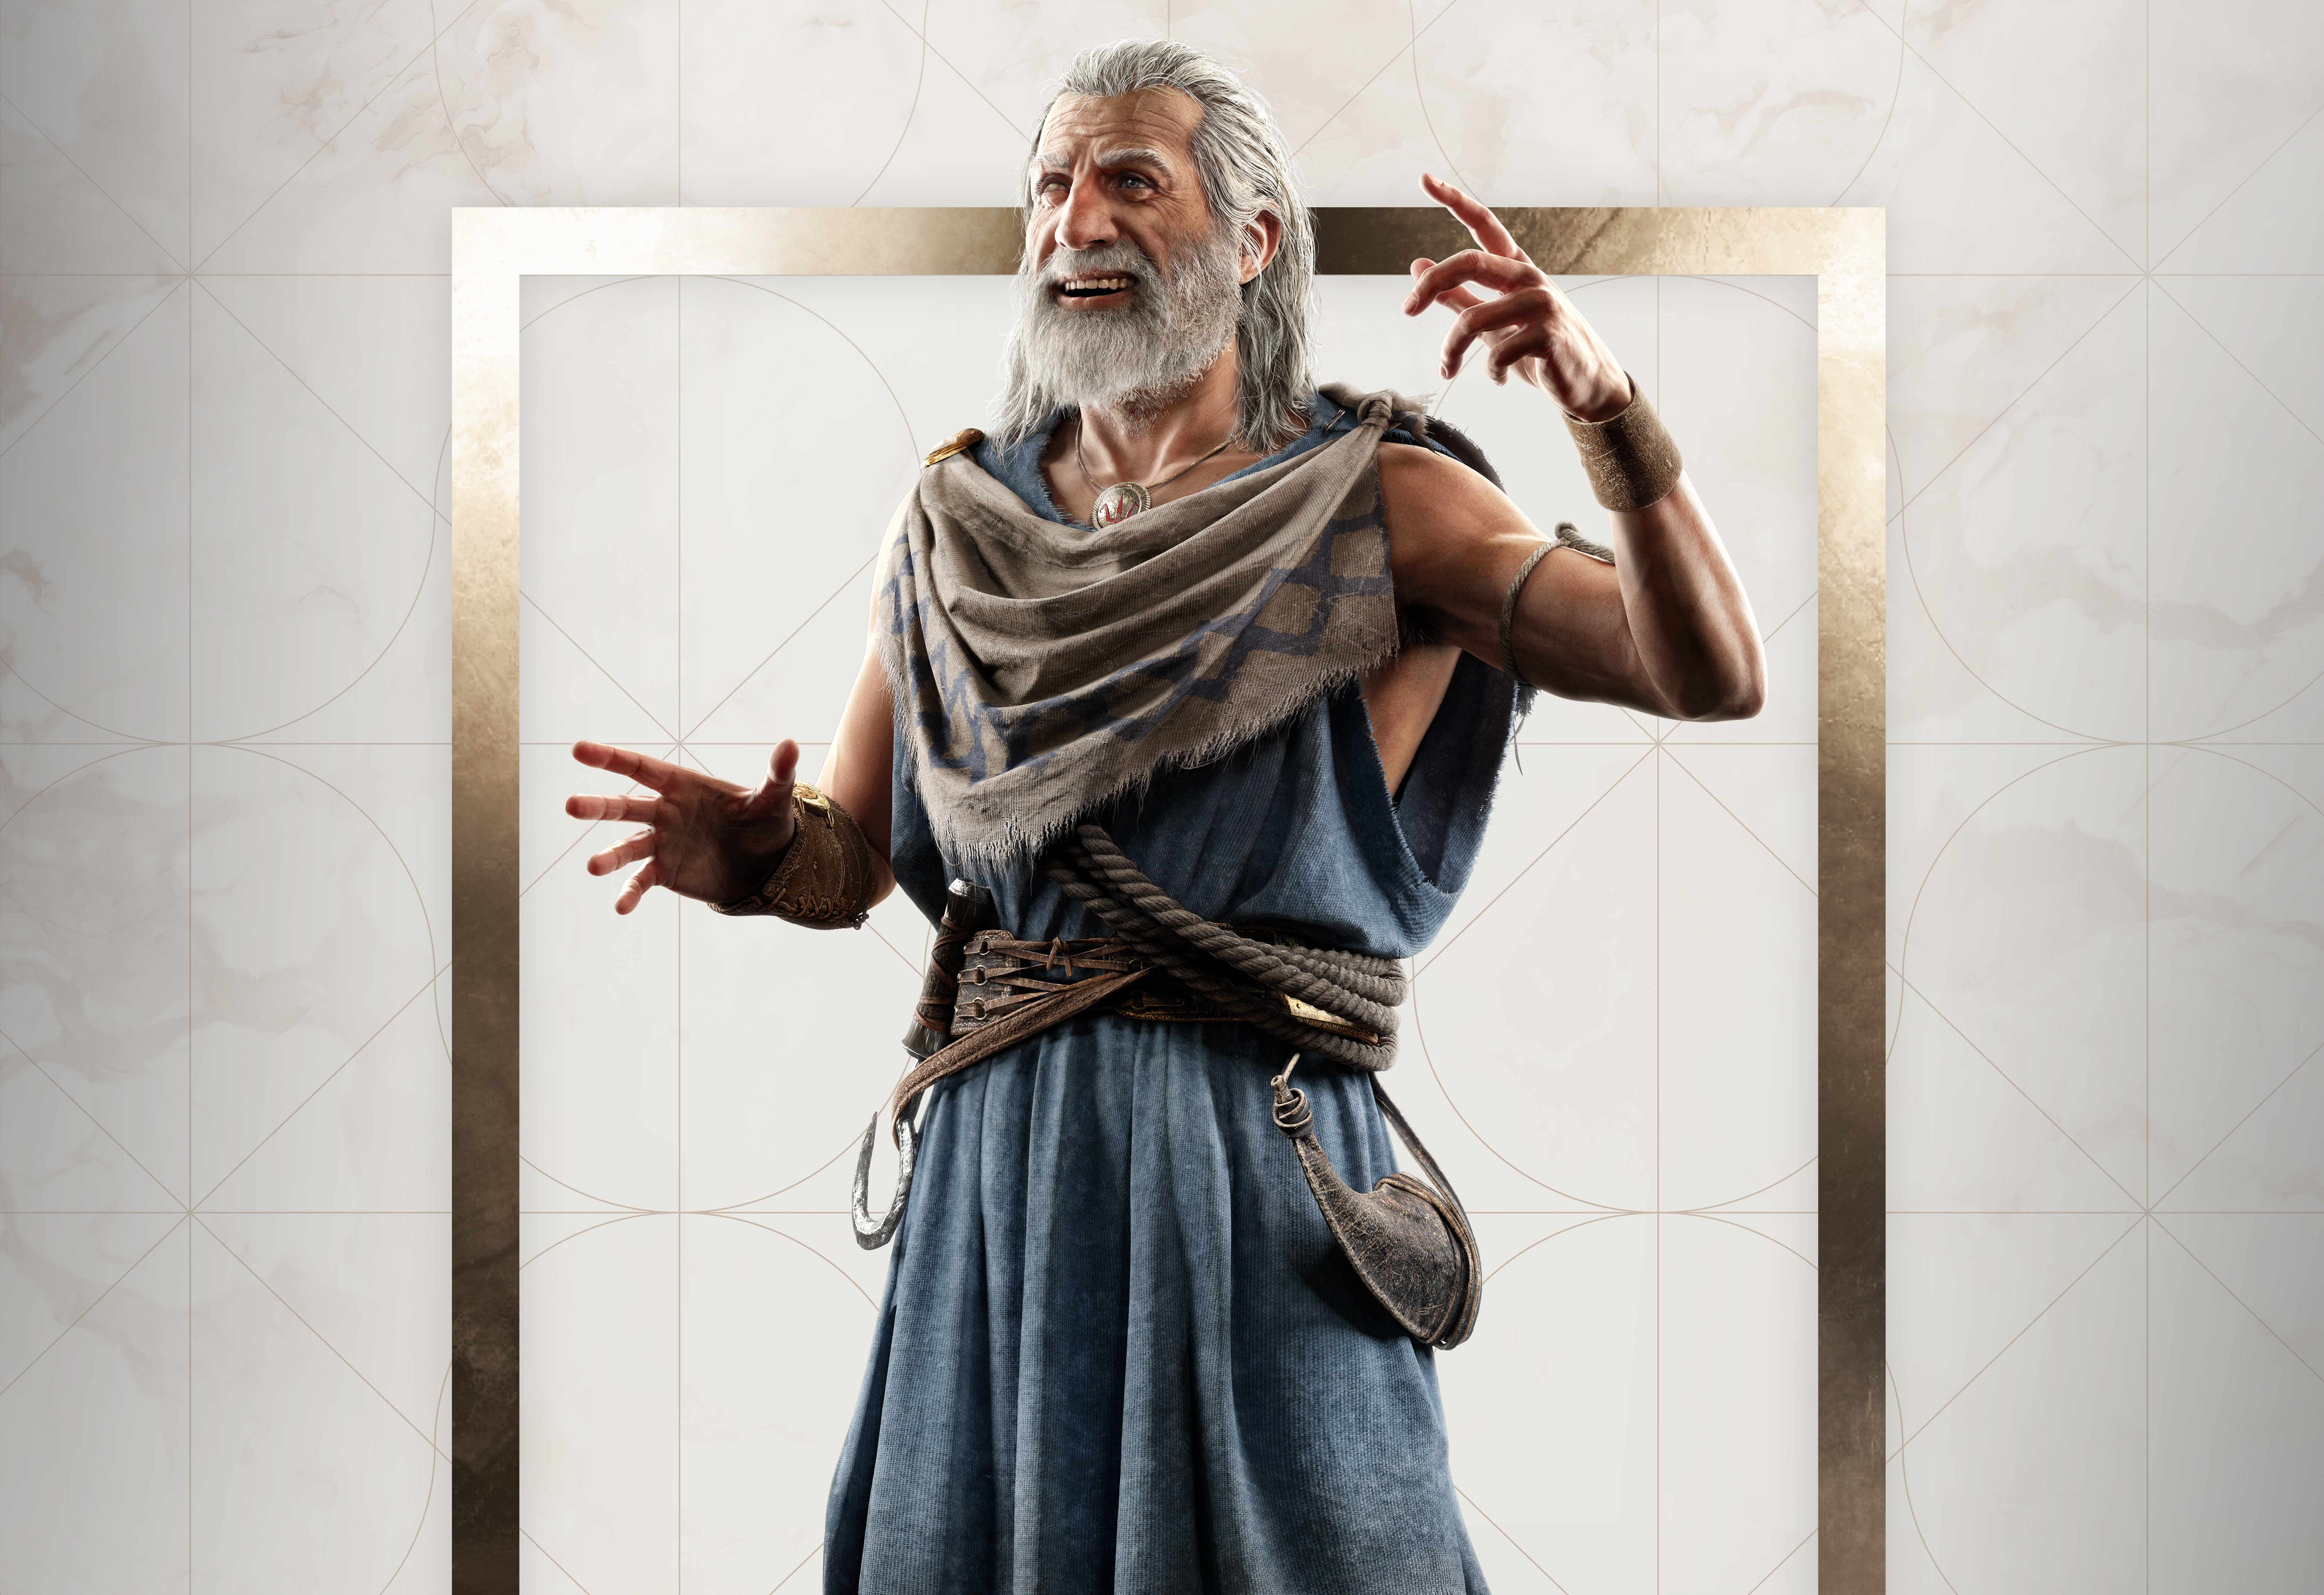 Video Game Assassin 039 S Creed Odyssey 6176x4240